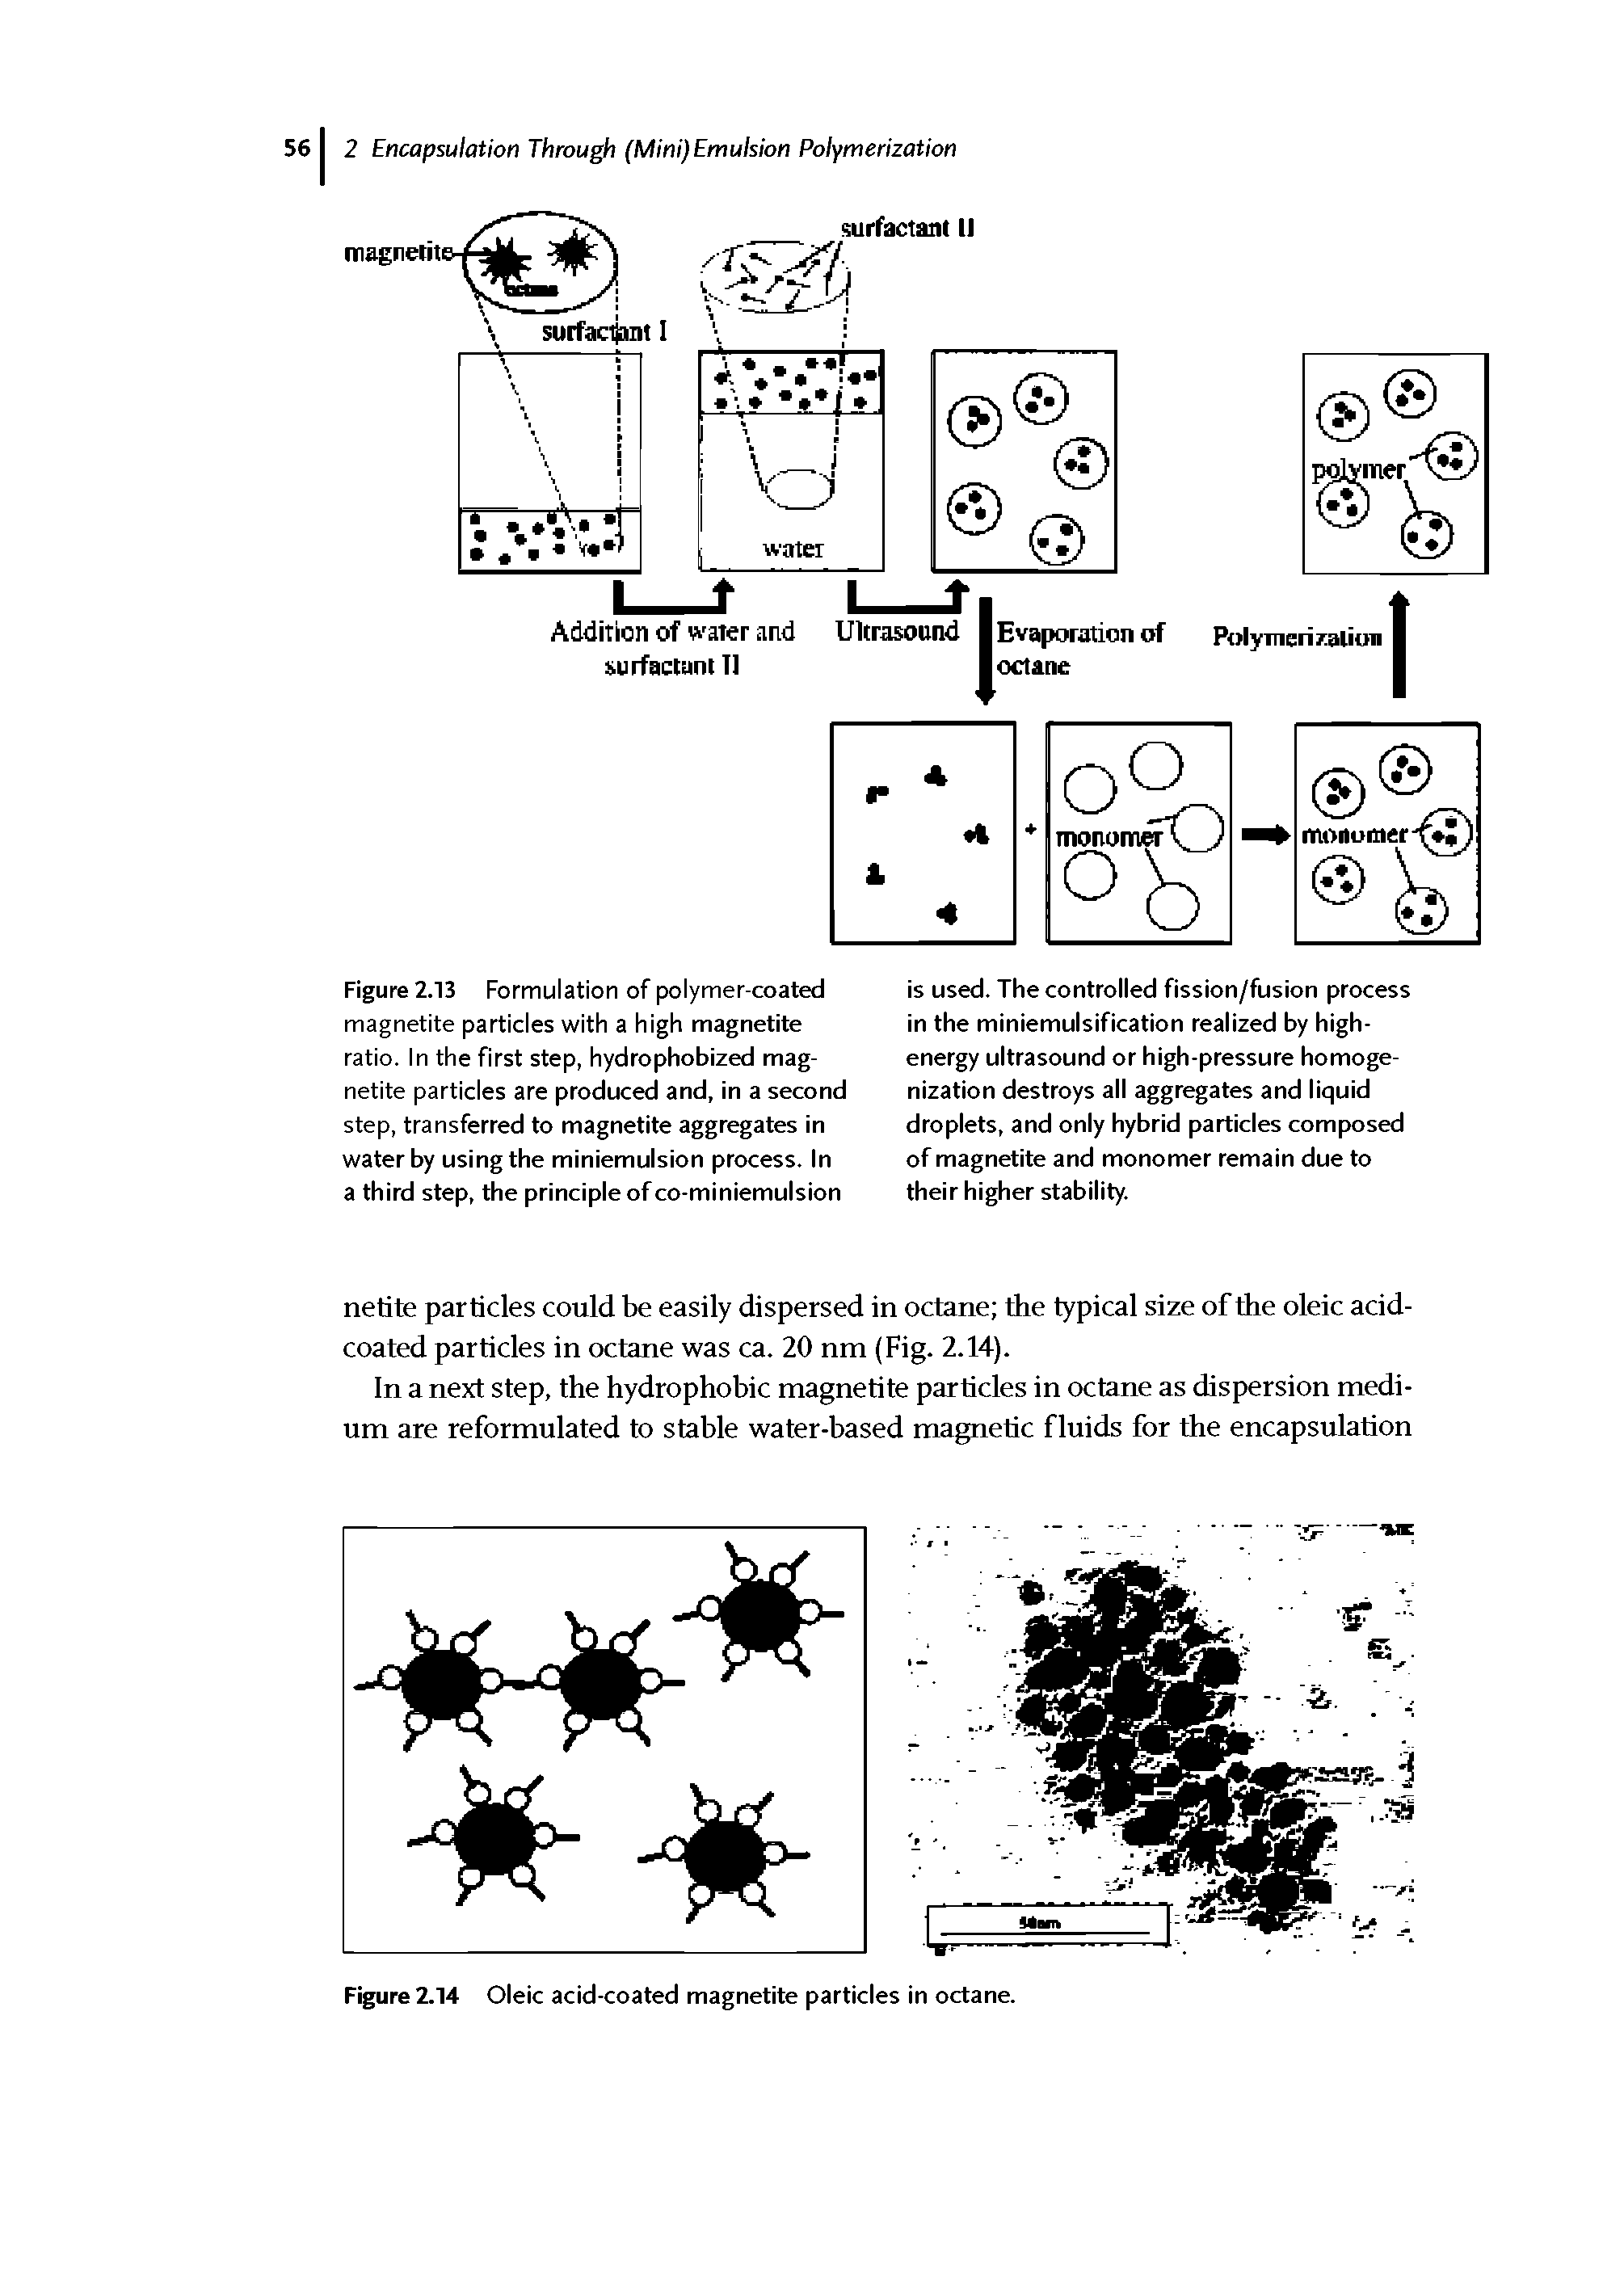 Figure 2.13 Formulation of polymer-coated magnetite particles with a high magnetite ratio. In the first step, hydrophobized magnetite particles are produced and, in a second step, transferred to magnetite aggregates in water by using the miniemulsion process. In a third step, the principle of co-miniemulsion...